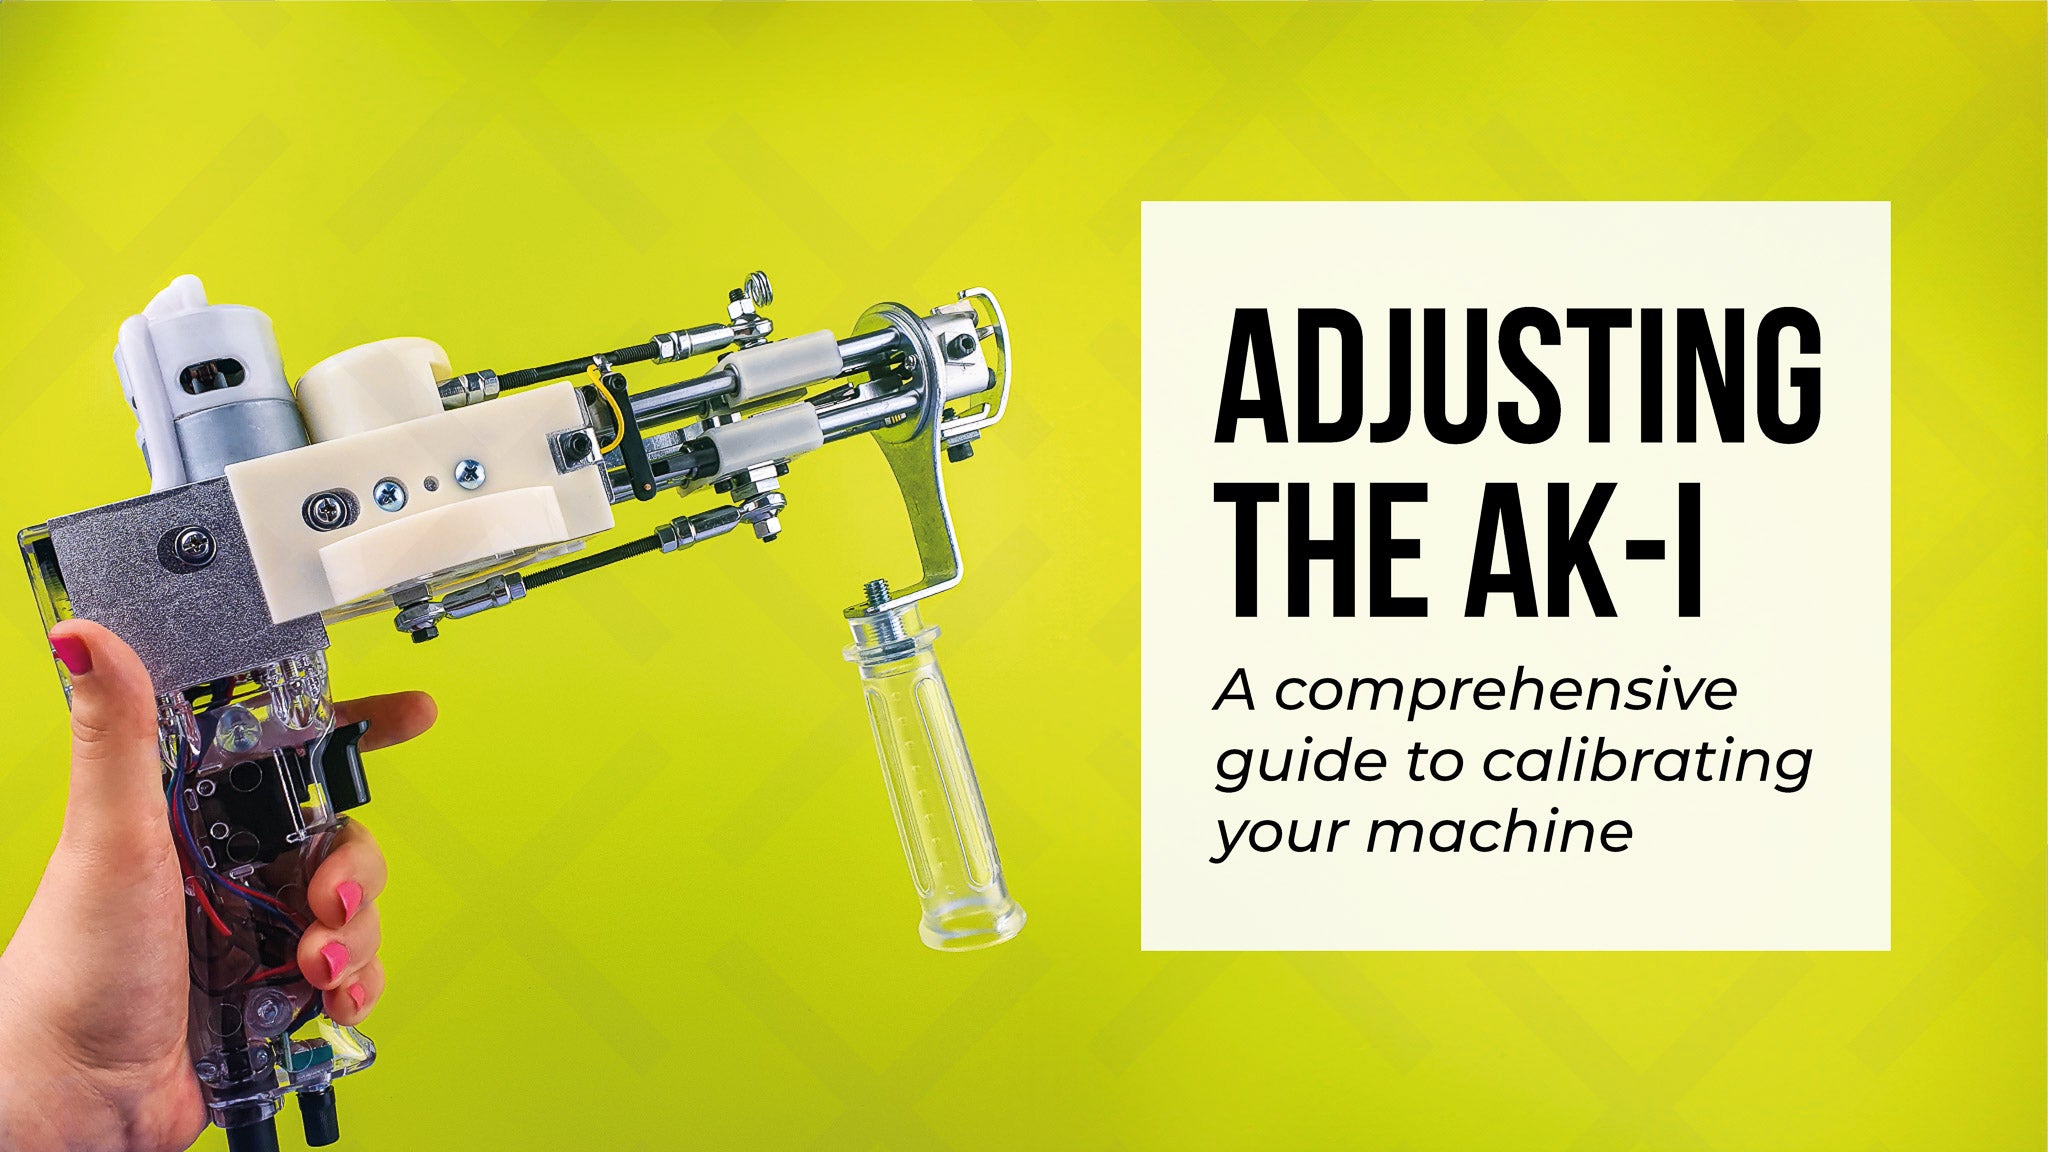 A hand holding the AK-I tufting machine with a green cross background. Text box reads "Adjusting the AK-I a comprehensive guide to calibrating your machine"